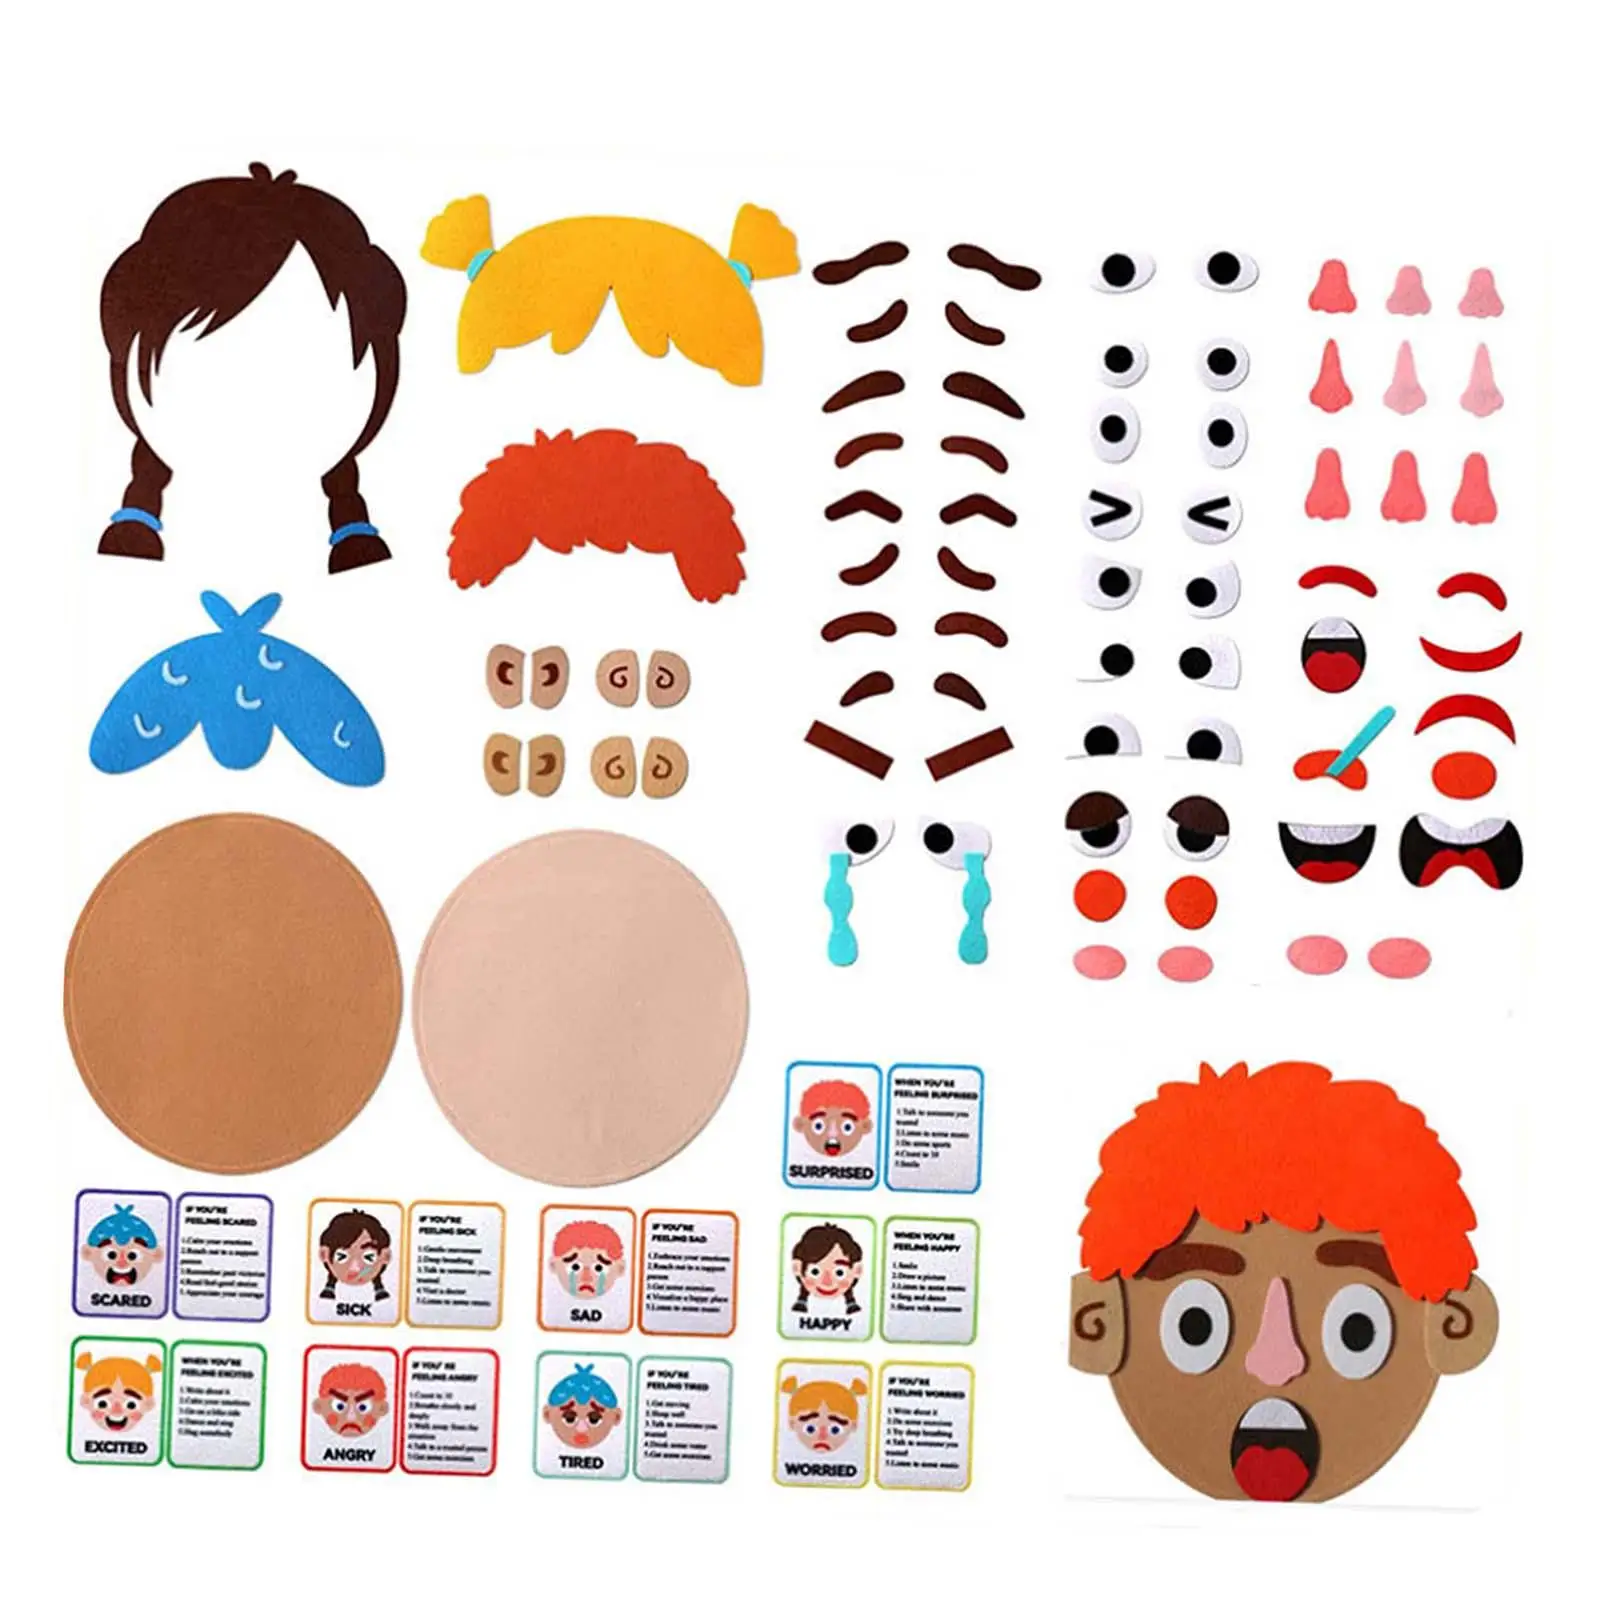 Kids Social Emotional Learning Learning Social Skills Learn about Emotions Faces Stickers Games for Girls Children Kids Ages 3+